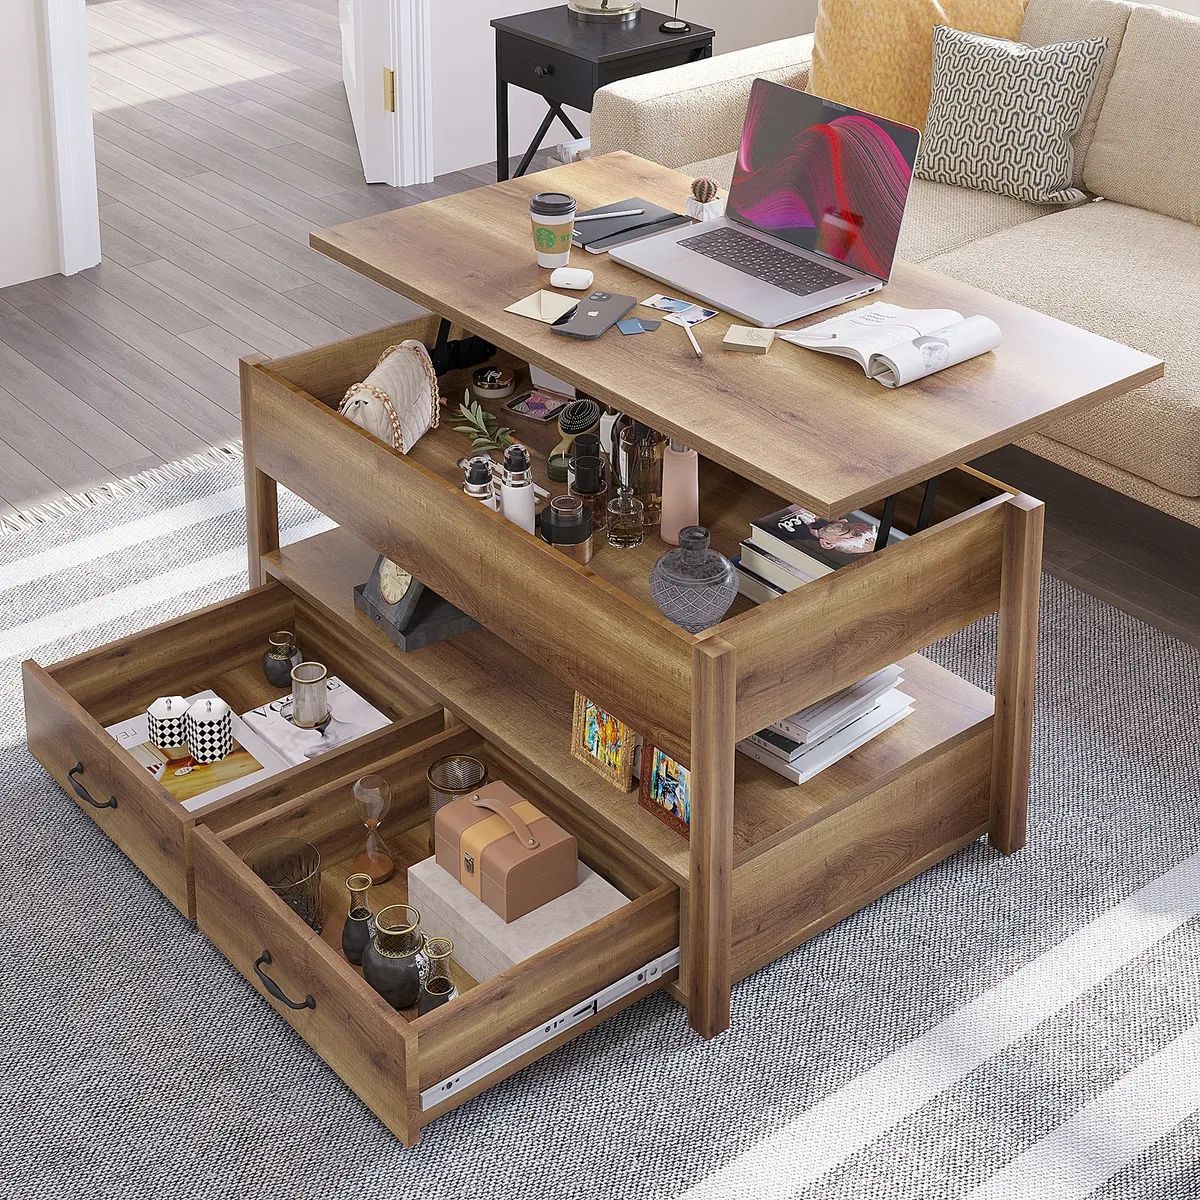 2 Drawer Lift Top Coffee Table Wooden With Hidden Compartment & Storage  Shelves | Ebay Pertaining To Coffee Tables With Hidden Compartments (Photo 4 of 15)